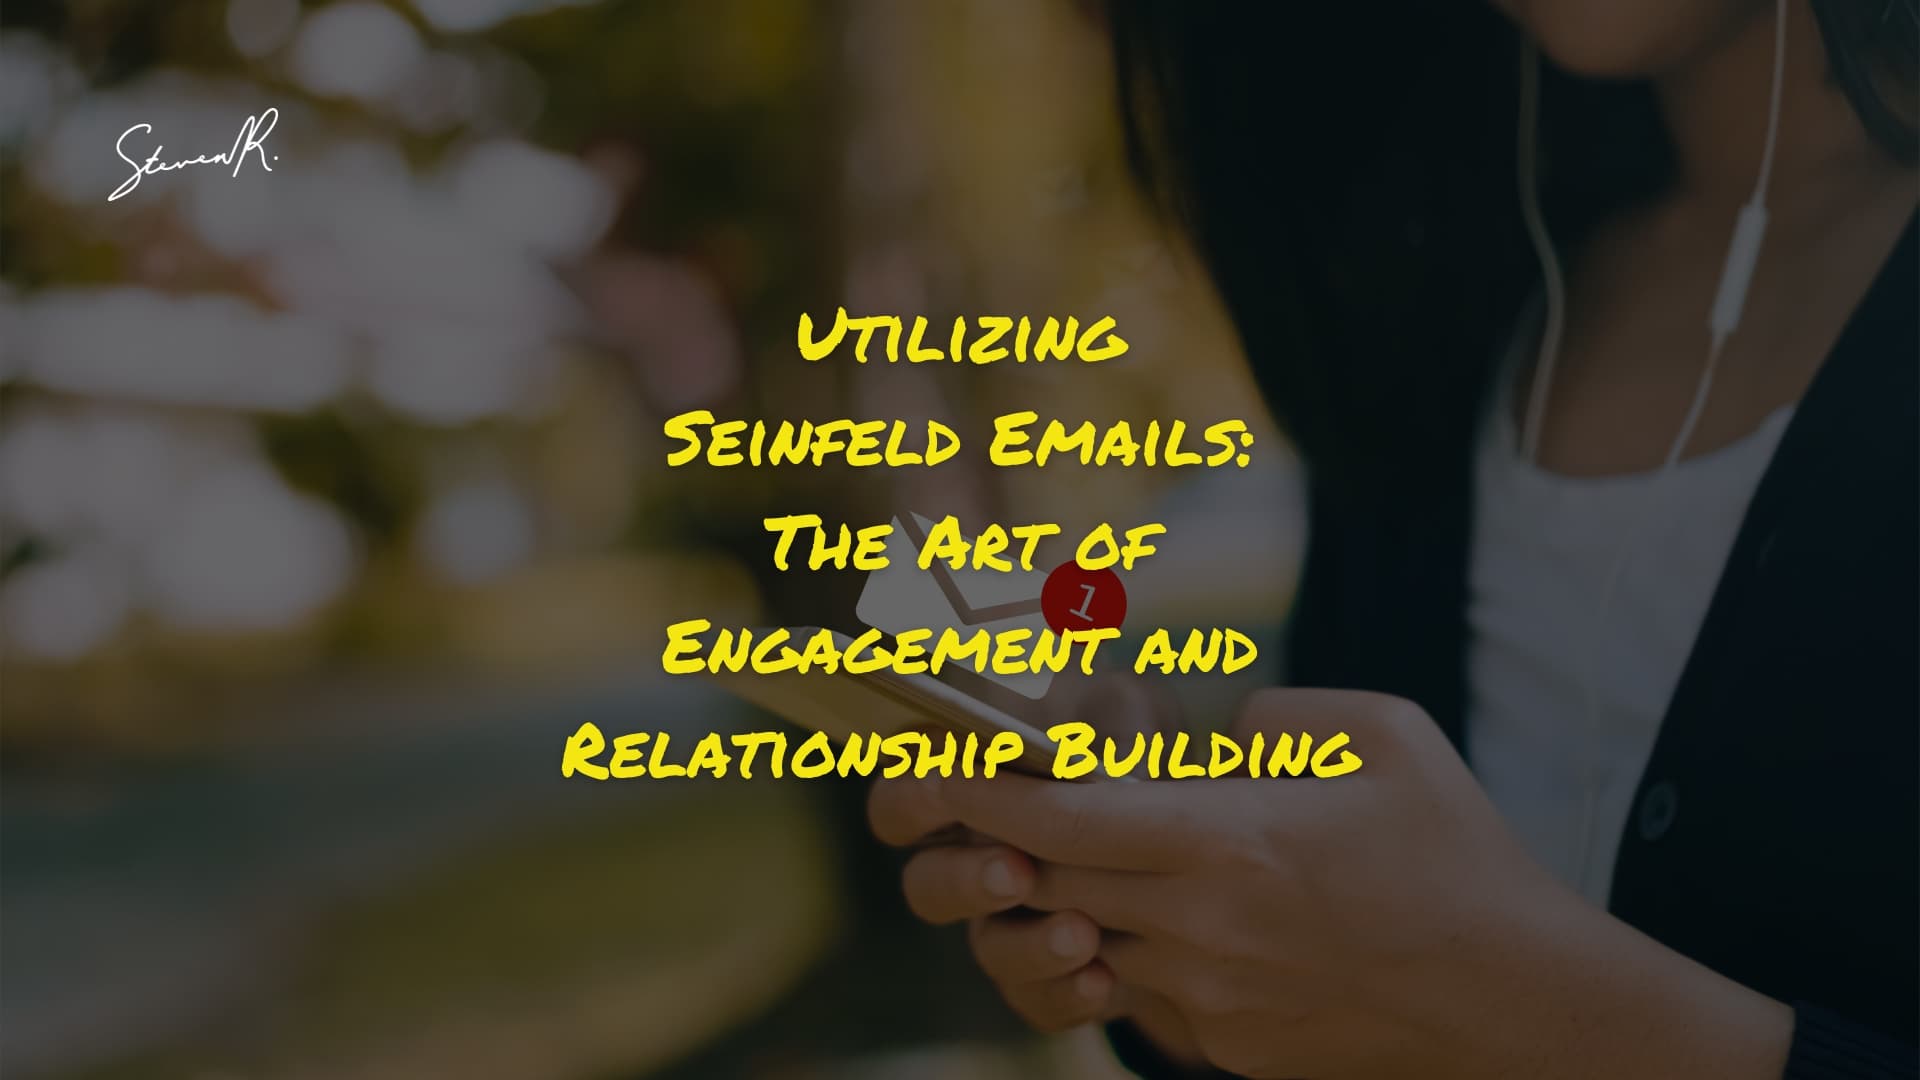 Utilizing Seinfeld Emails: The Art of Engagement and Relationship Building